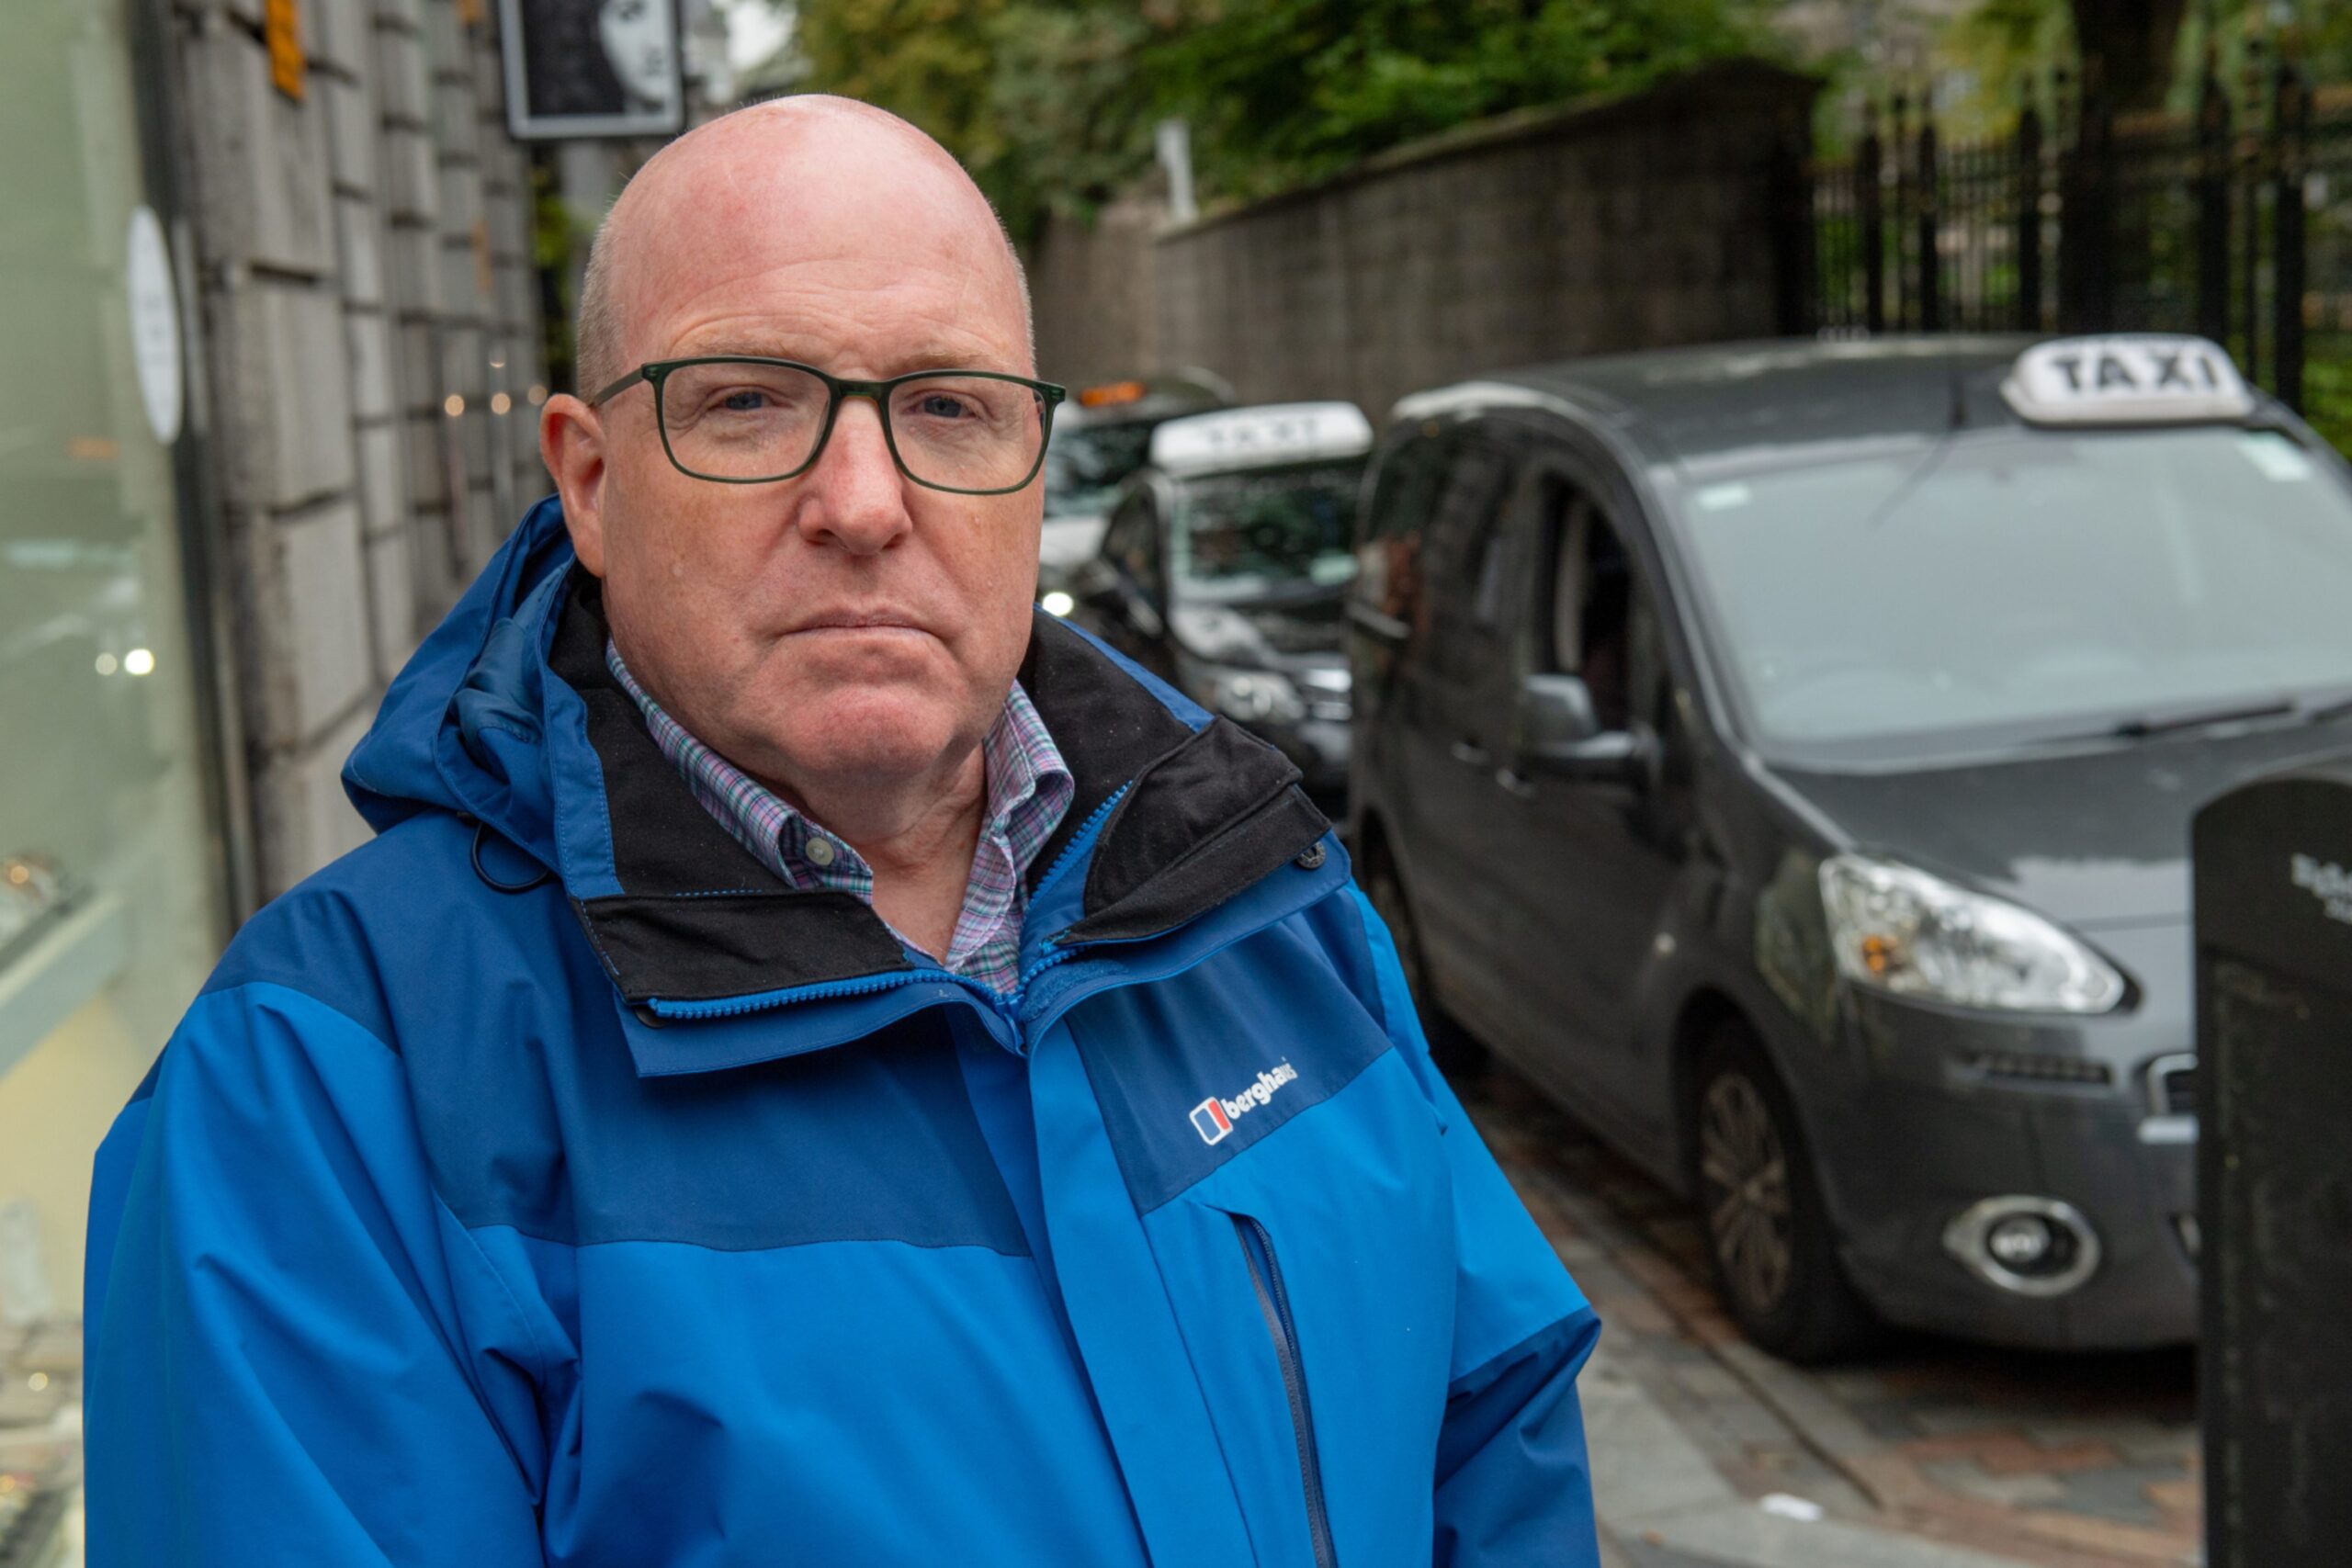 Bob Keiller thinks Uber could be an answer to Aberdeen's taxi shortages and unreliable Aberdeen public transport.